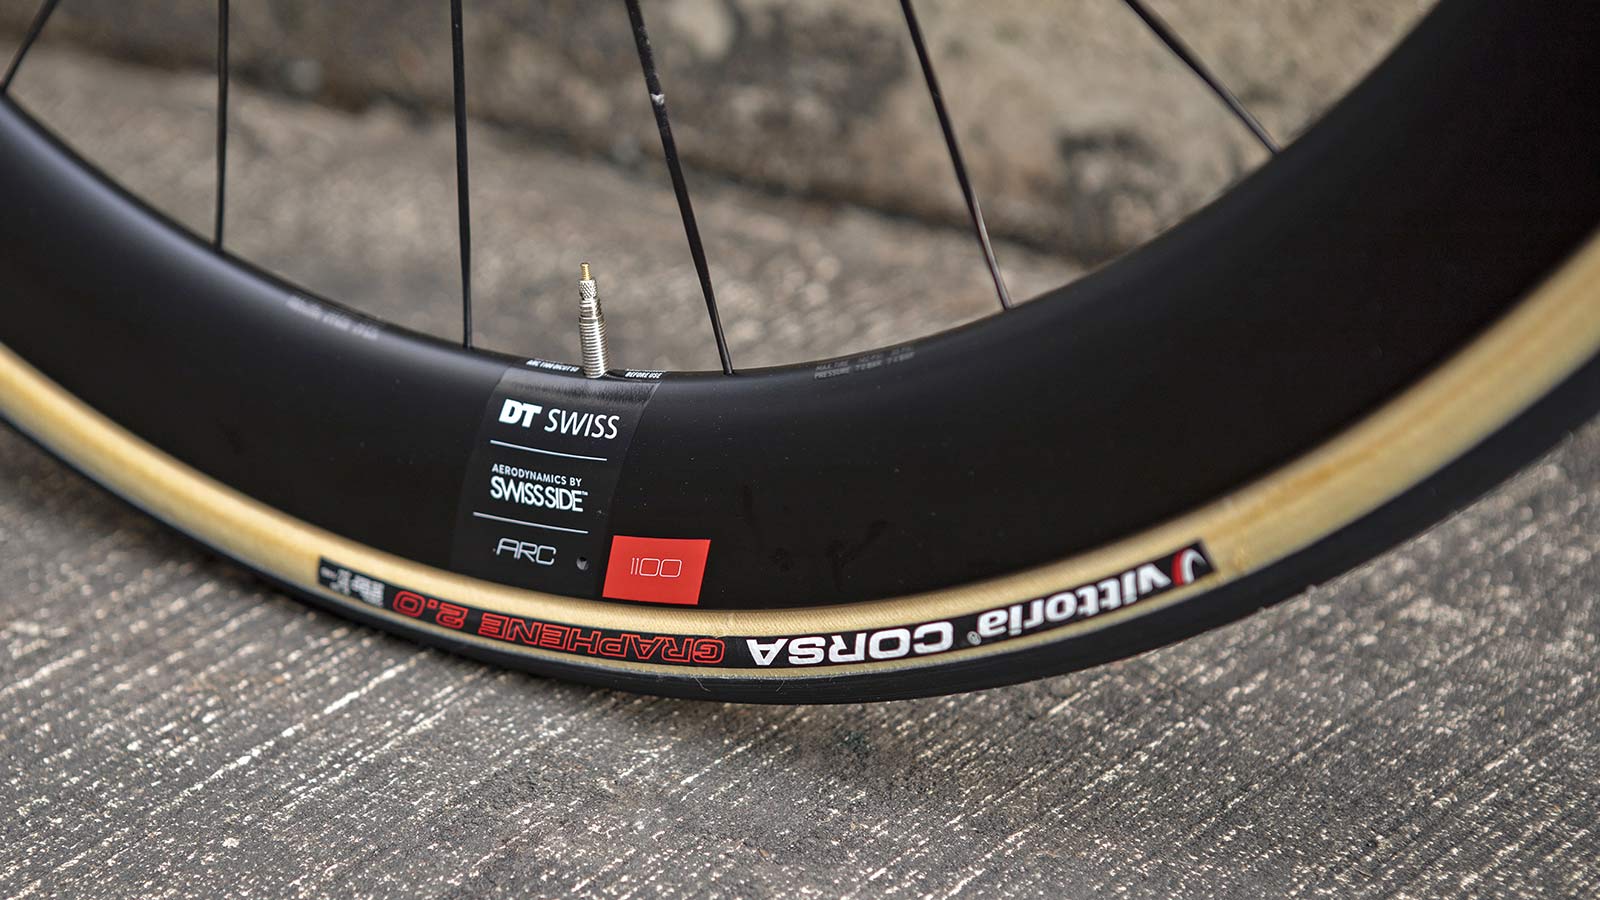 DT Swiss and Ridley sponsor Lotto Soudal with road tubeless wheels for 2022 World Tour, Vittoria Corsa tire